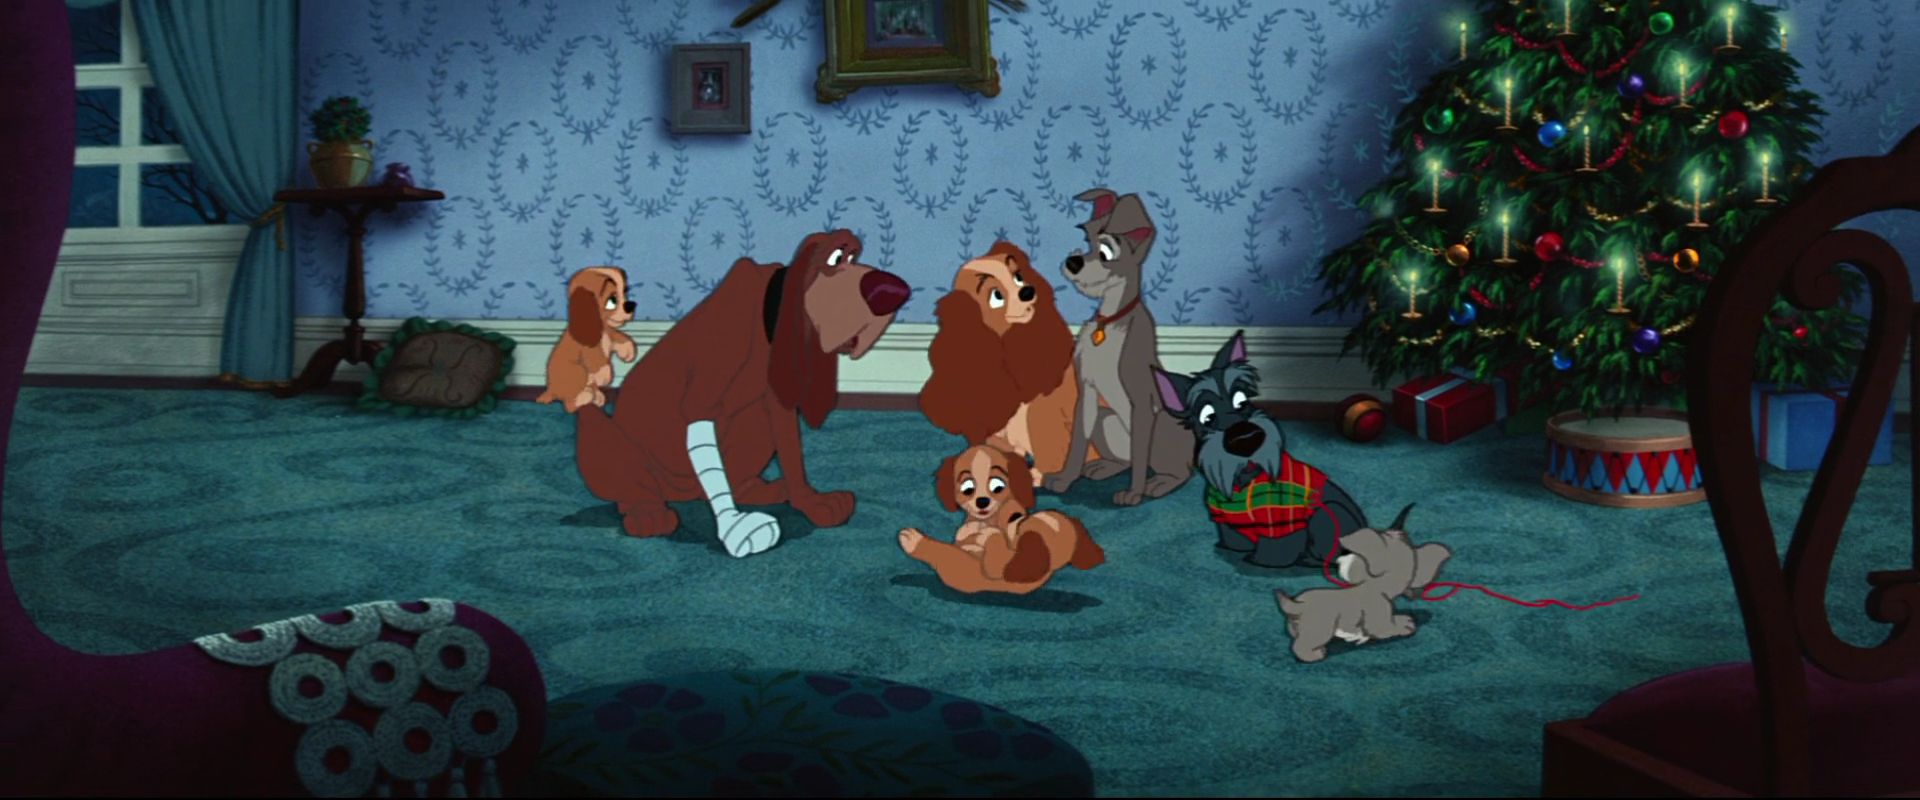 REVIEW] 'Lady and the Tramp' is a Magical Mess - Rotoscopers